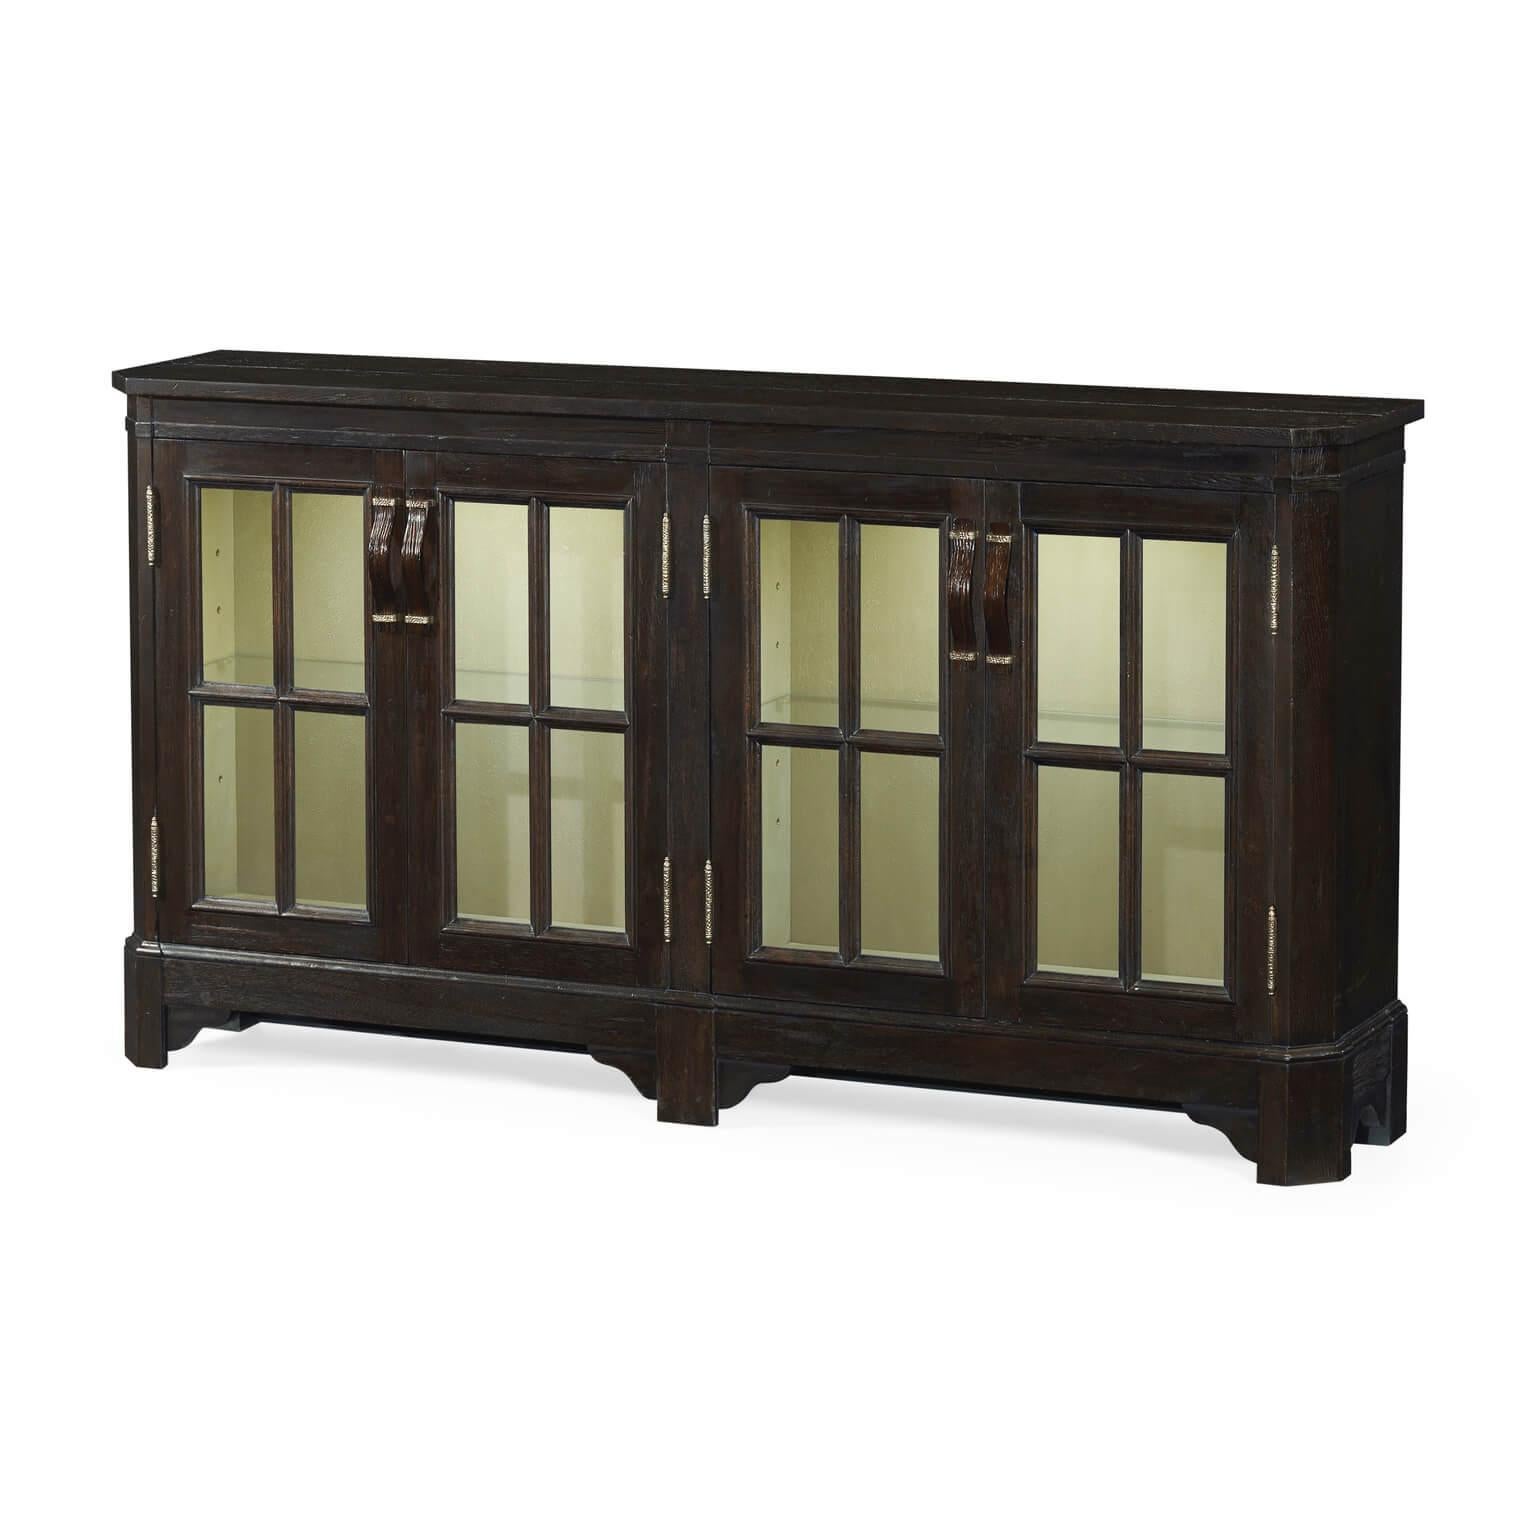 English dark ale country style planked low bookcase with internal lighting, four doors, and adjustable glass shelves. Intricate wooden strap handles with parquet brass details on the door fronts.

Dimensions: 66 7/8